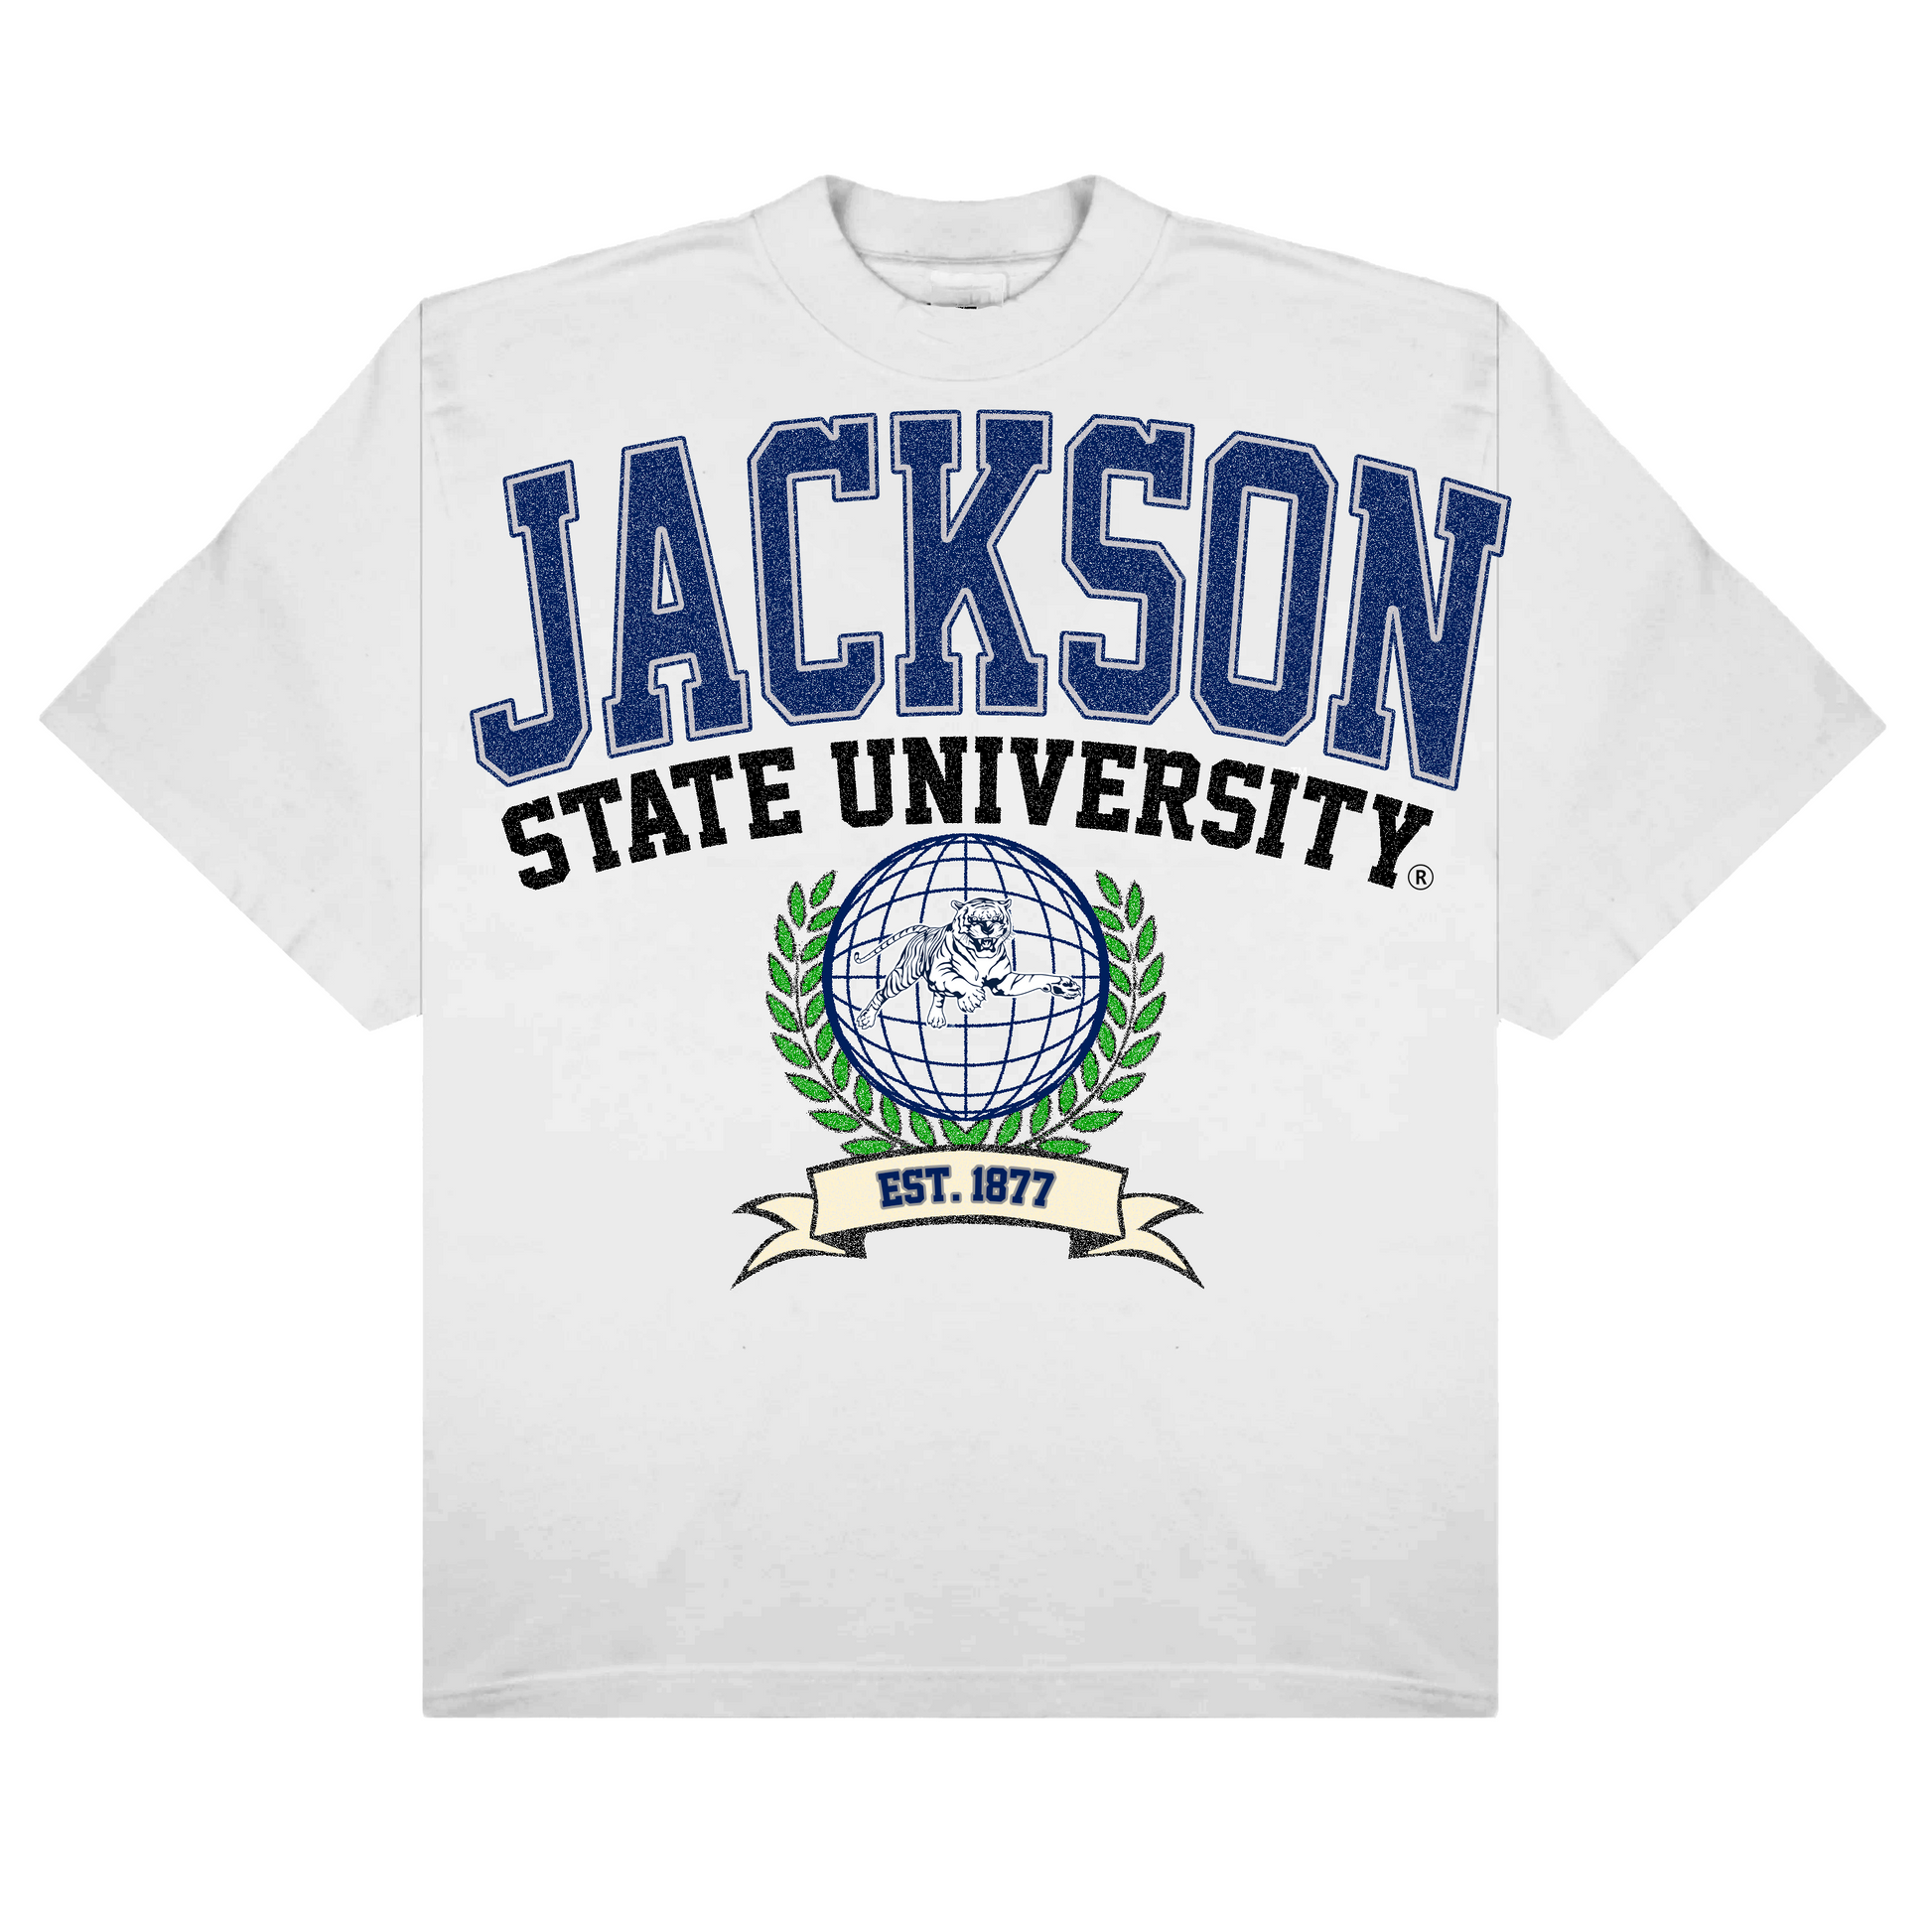 Jackson State T-shirt -Jackson State Apparel and Clothing - 1921 movement